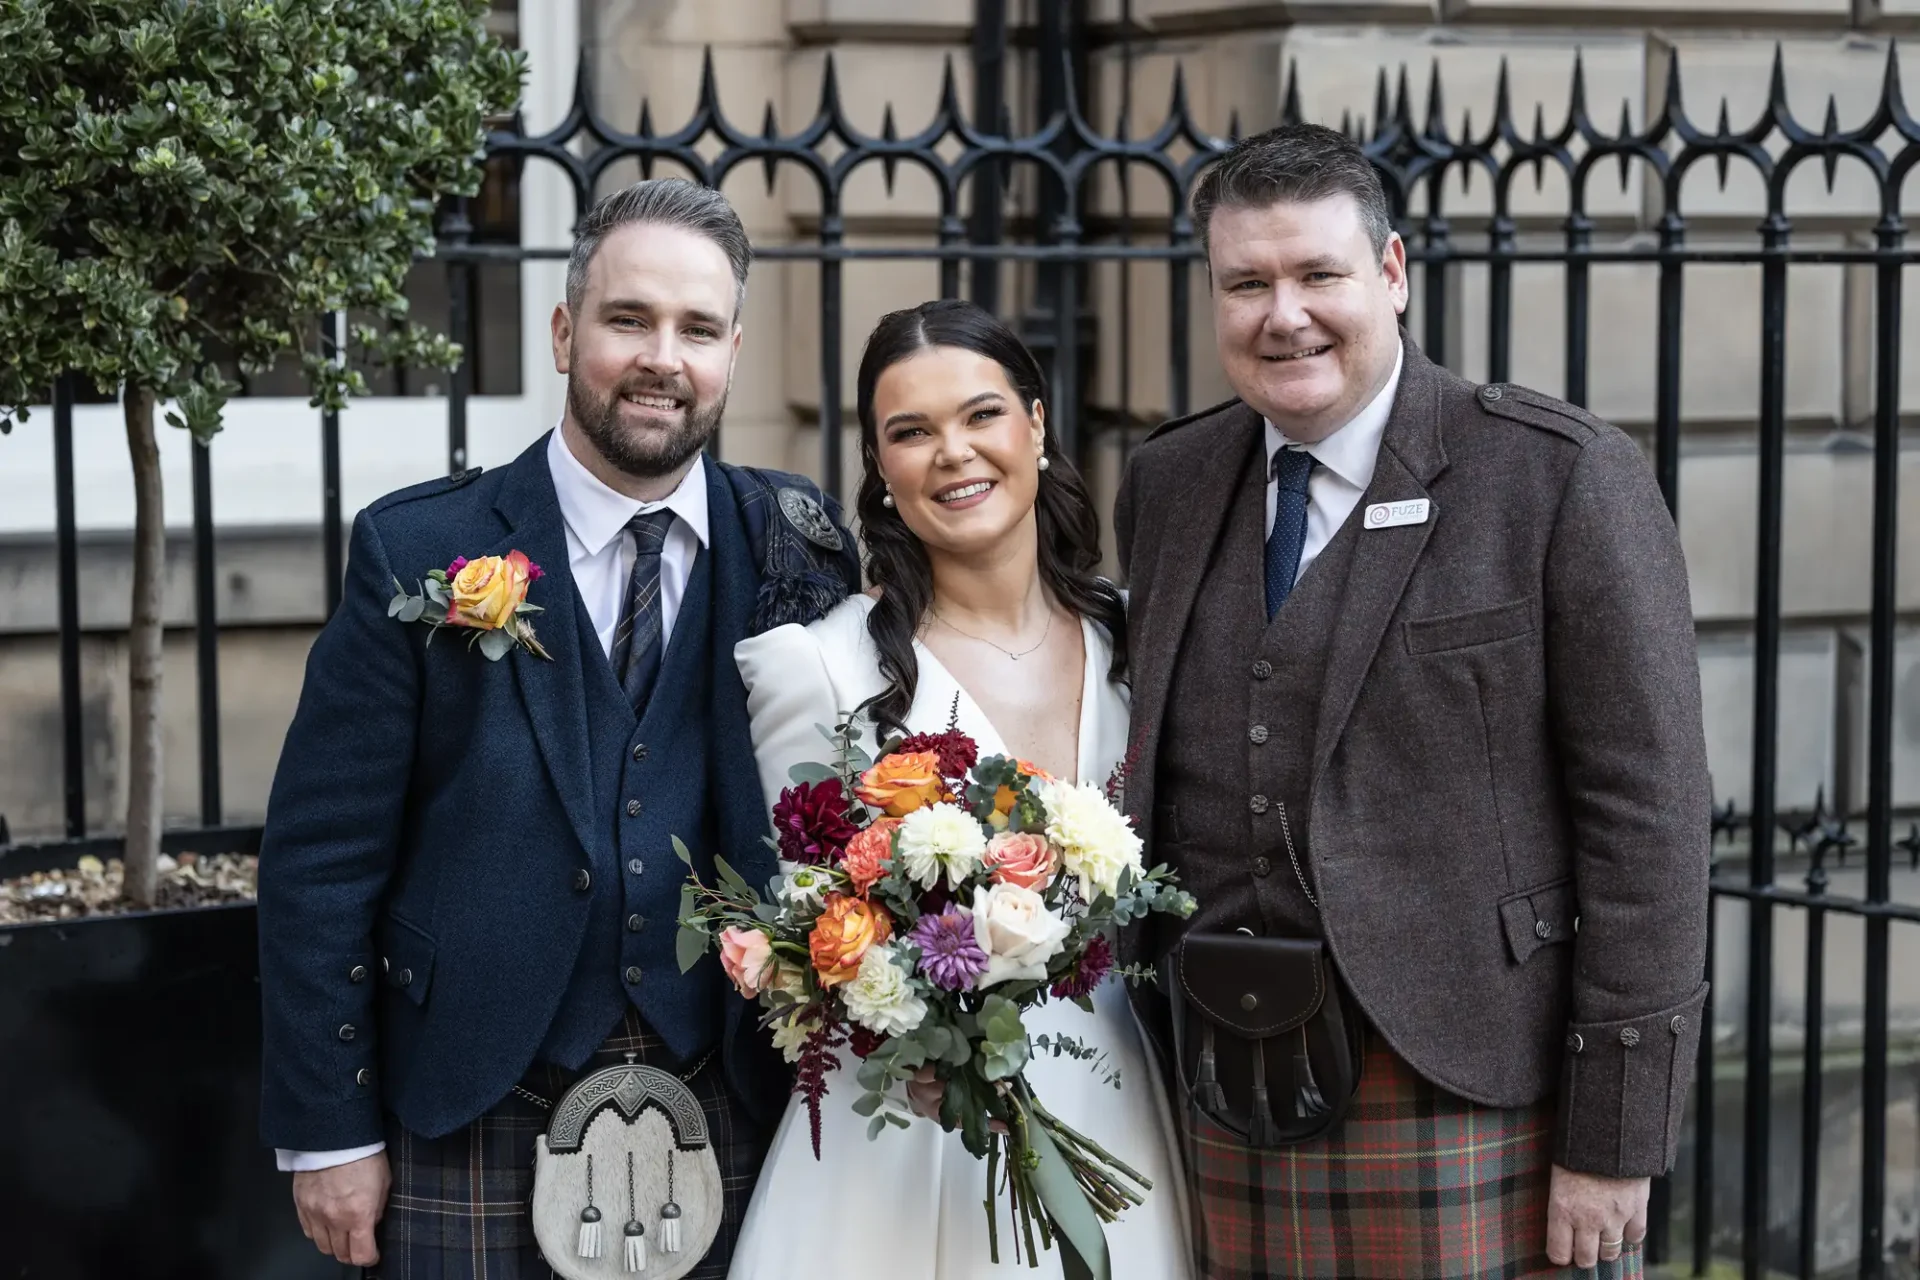 Three people dressed in formal attire, including two men in kilts and a woman holding a bouquet, smiling together at a wedding event.